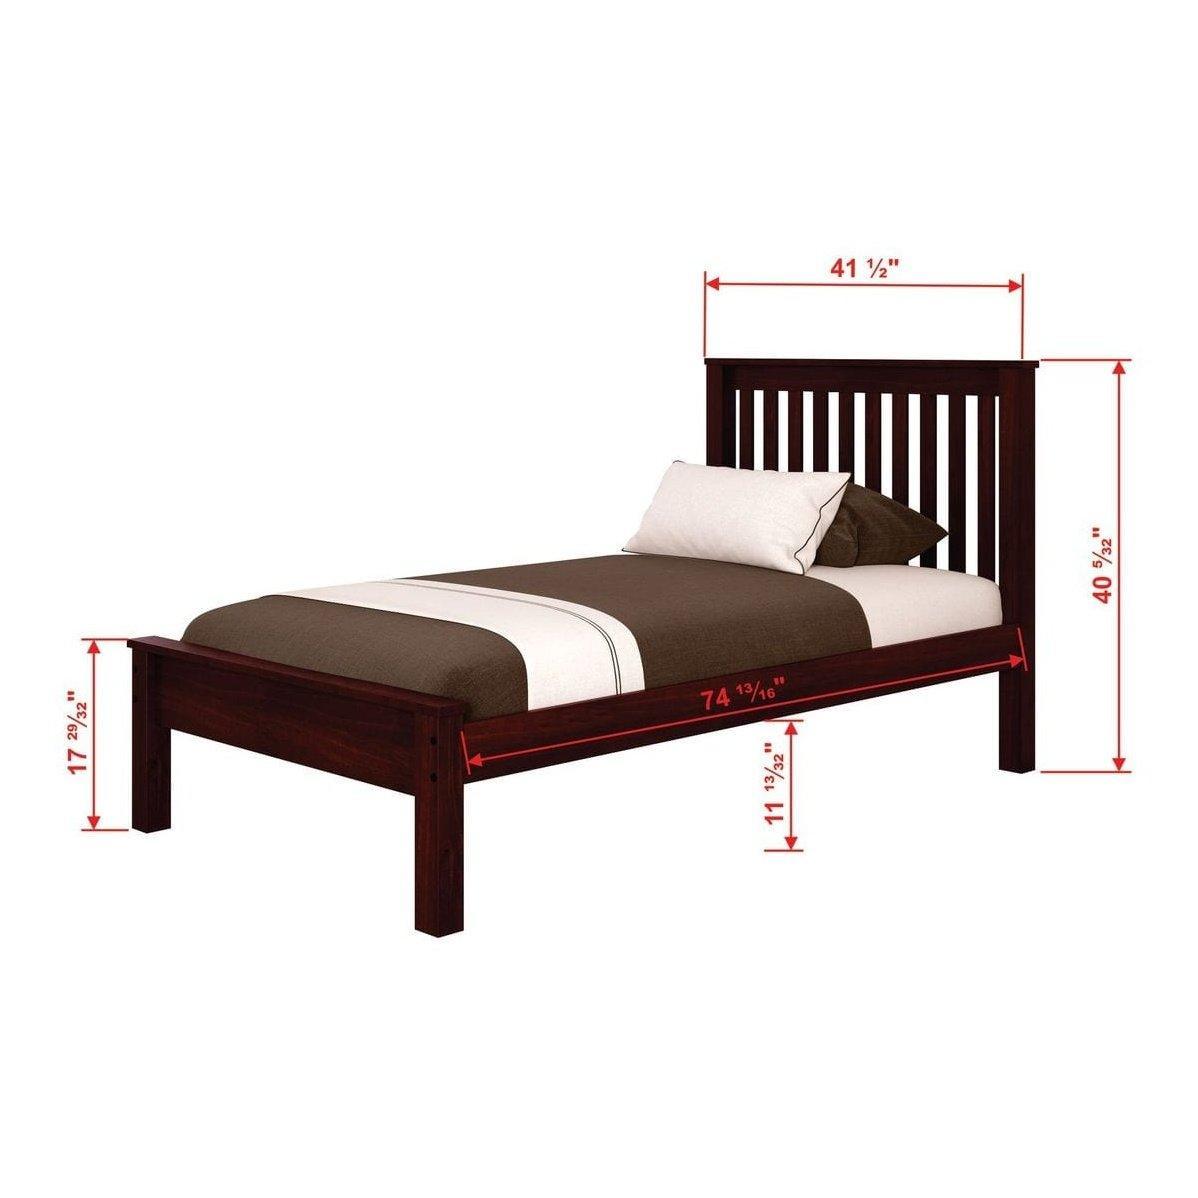 Donco Twin Contempo Bed Dual Under Bed Drawers Dark Cappuccino Finish 500-TCP_505-CP - Bedroom Depot USA